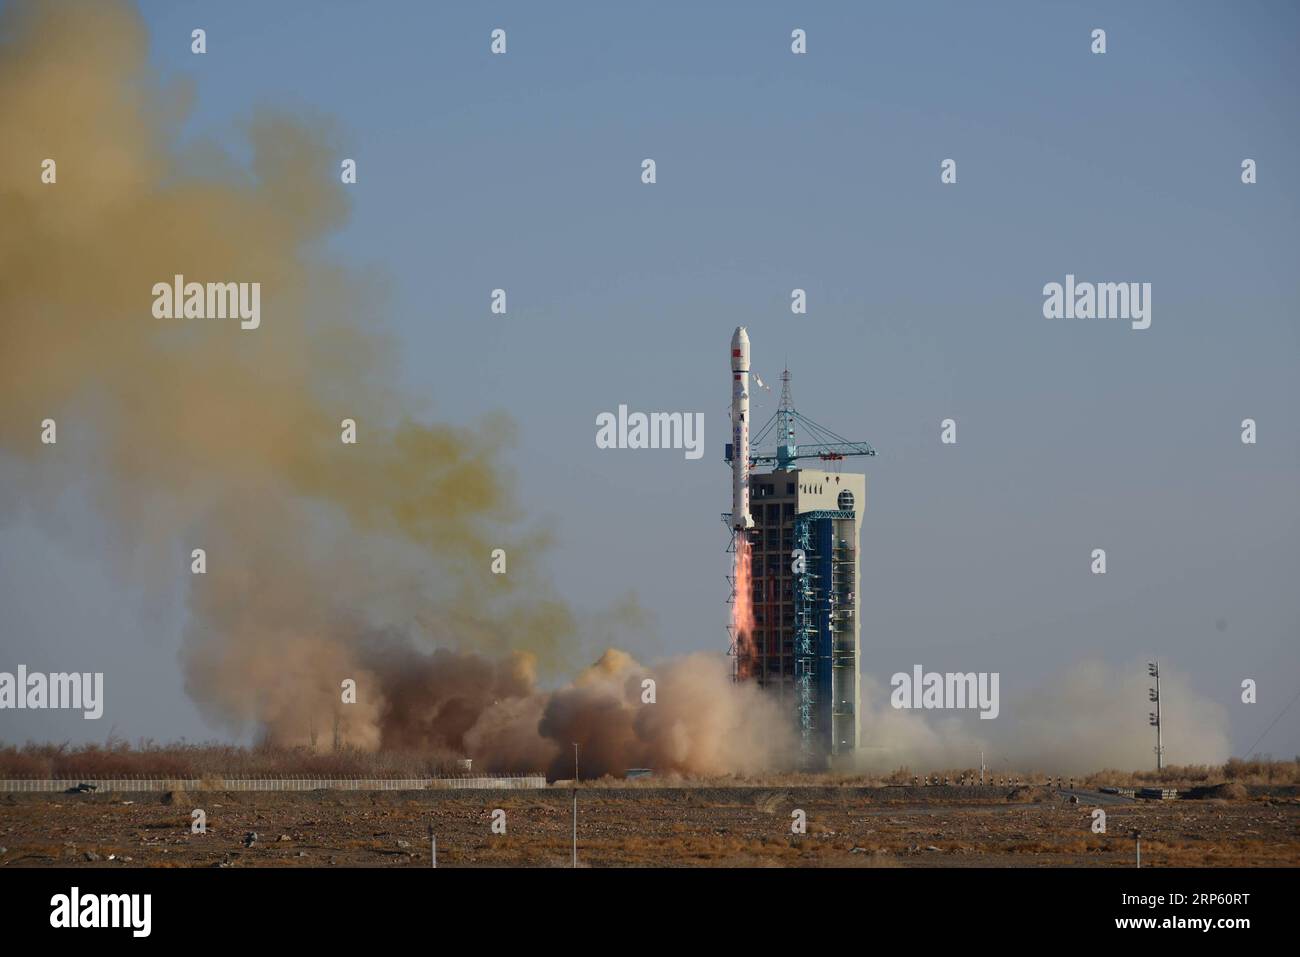 (181229) -- JIUQUAN, Dec. 29, 2018 -- A Long March-2D rocket carrying six Yunhai-2 satellites and a test communication satellite blasts off from the Jiuquan Satellite Launch Center in northwest China, Dec. 29, 2018. The six atmospheric environment research satellites will be used to study atmospheric environment, monitor space environment, prevent and reduce disasters, and conduct scientific experiments. ) CHINA-GANSU-JIUQUAN-SATELLITES-LAUNCH (CN) HaoxWei PUBLICATIONxNOTxINxCHN Stock Photo